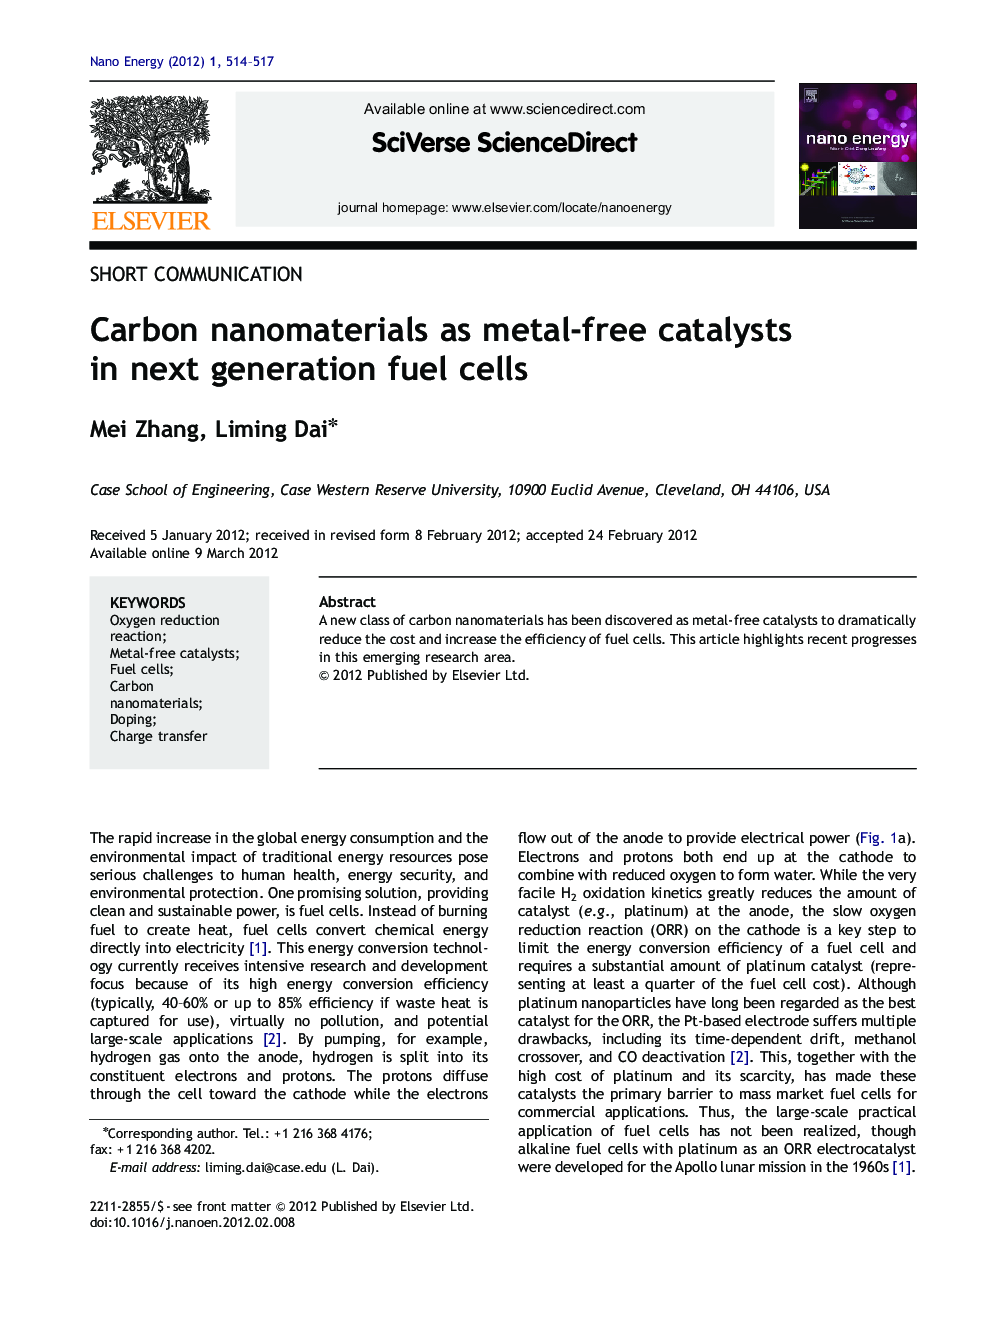 Carbon nanomaterials as metal-free catalysts in next generation fuel cells